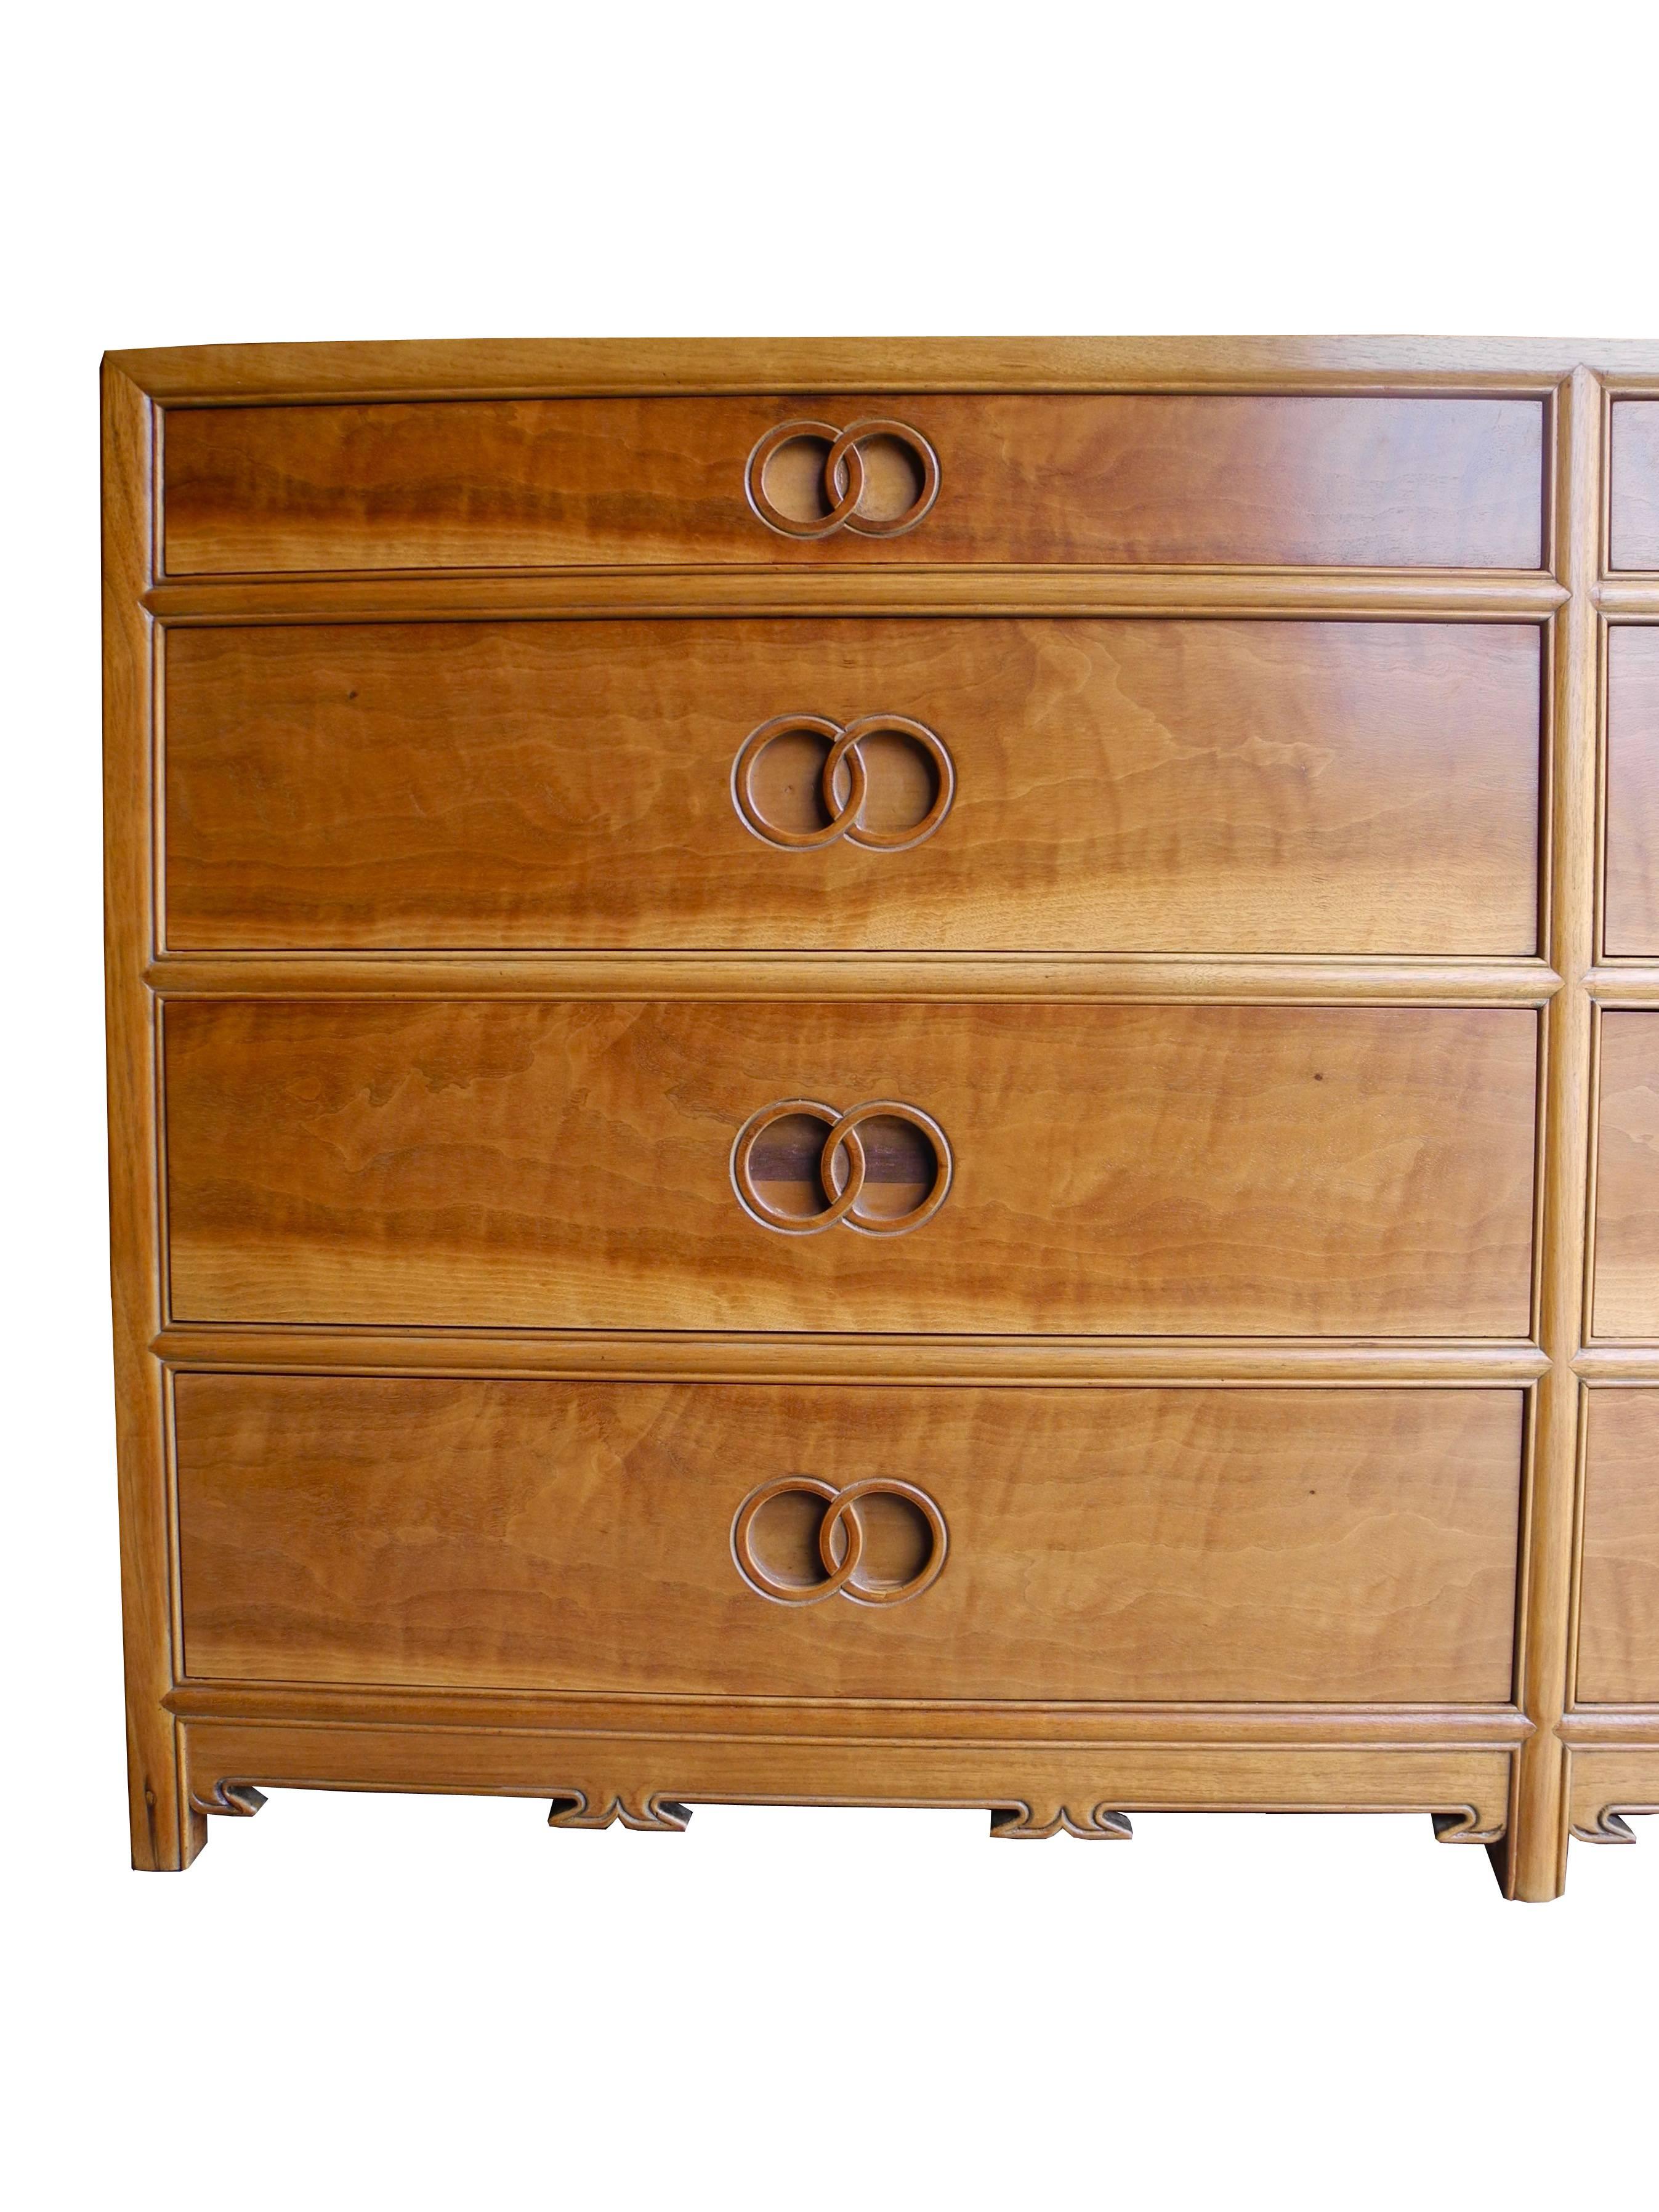 This lovely two bank dresser with eight drawers made of natural light walnut is designed by Michael Taylor. It has just the right amount of details in the base and handles.